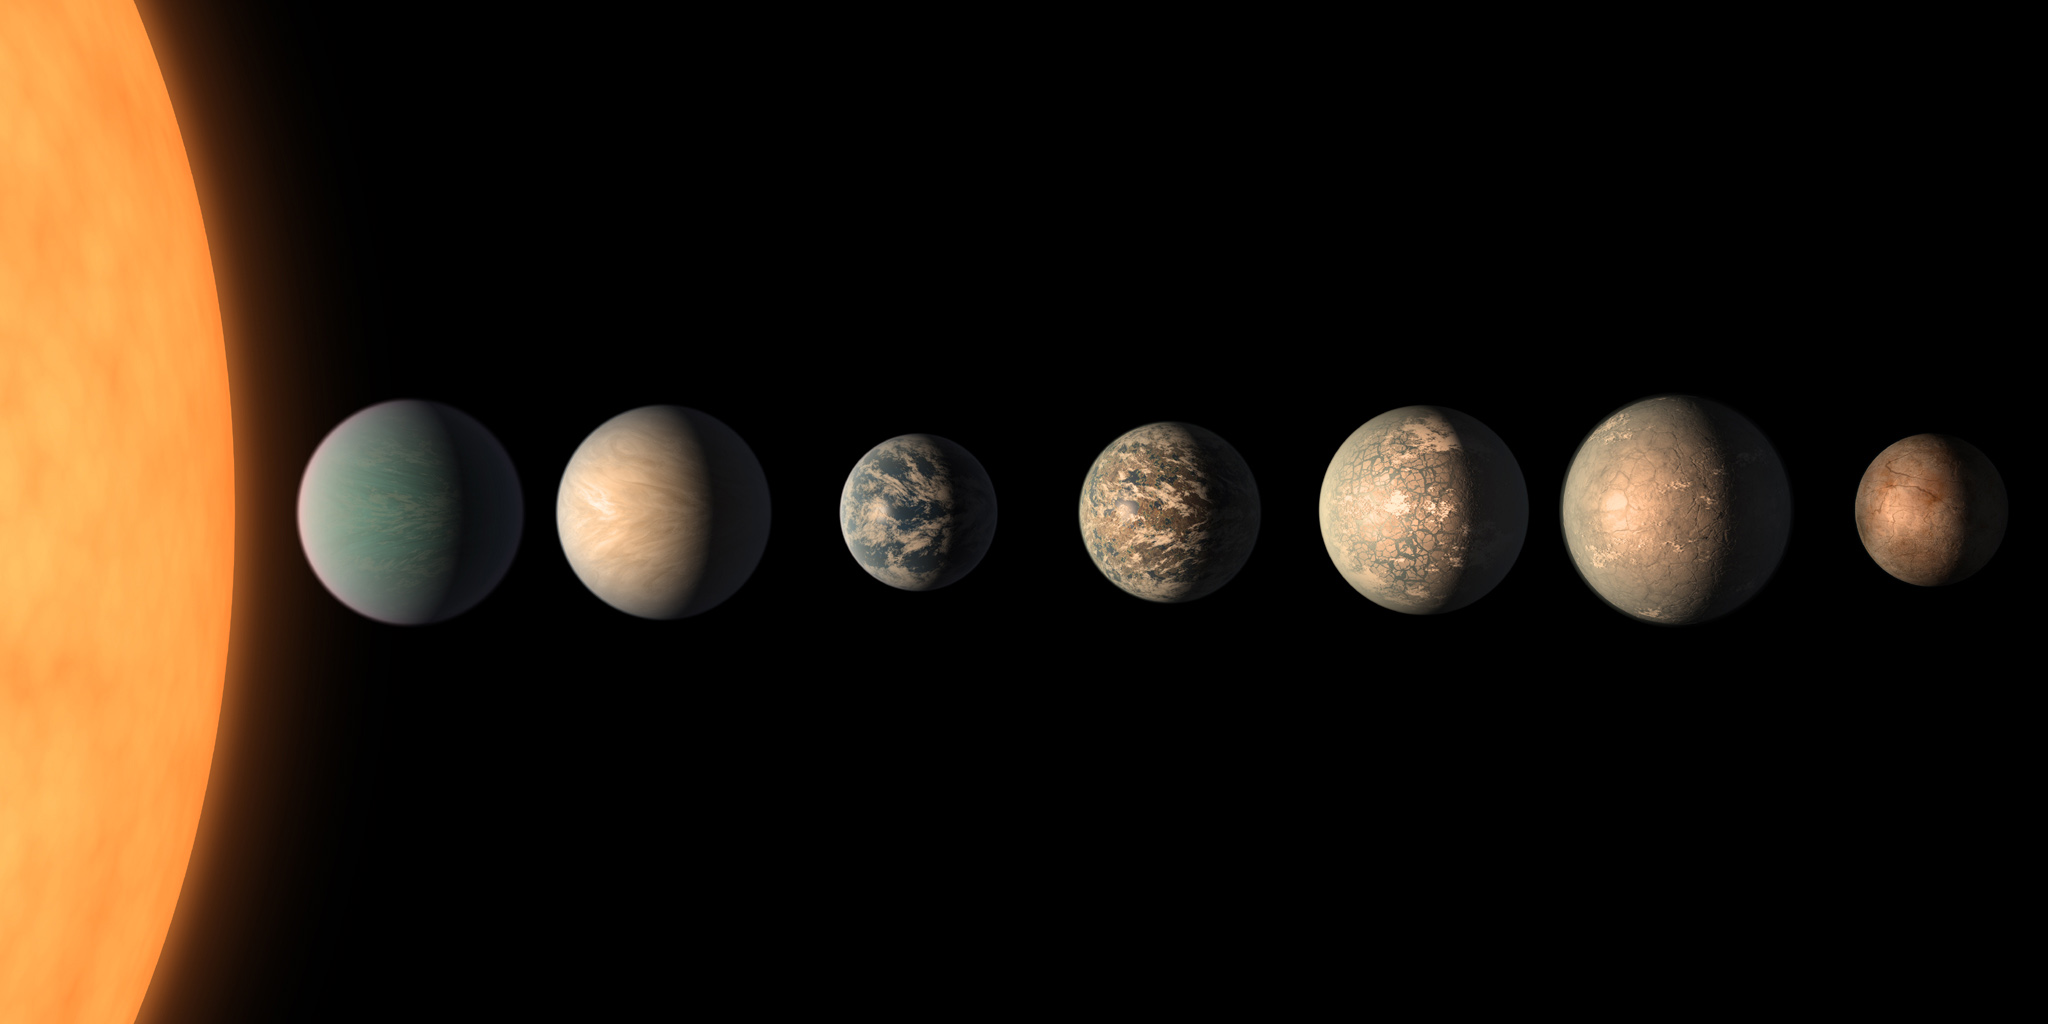 Illustration of the TRAPPIST-1 star and its system of planets